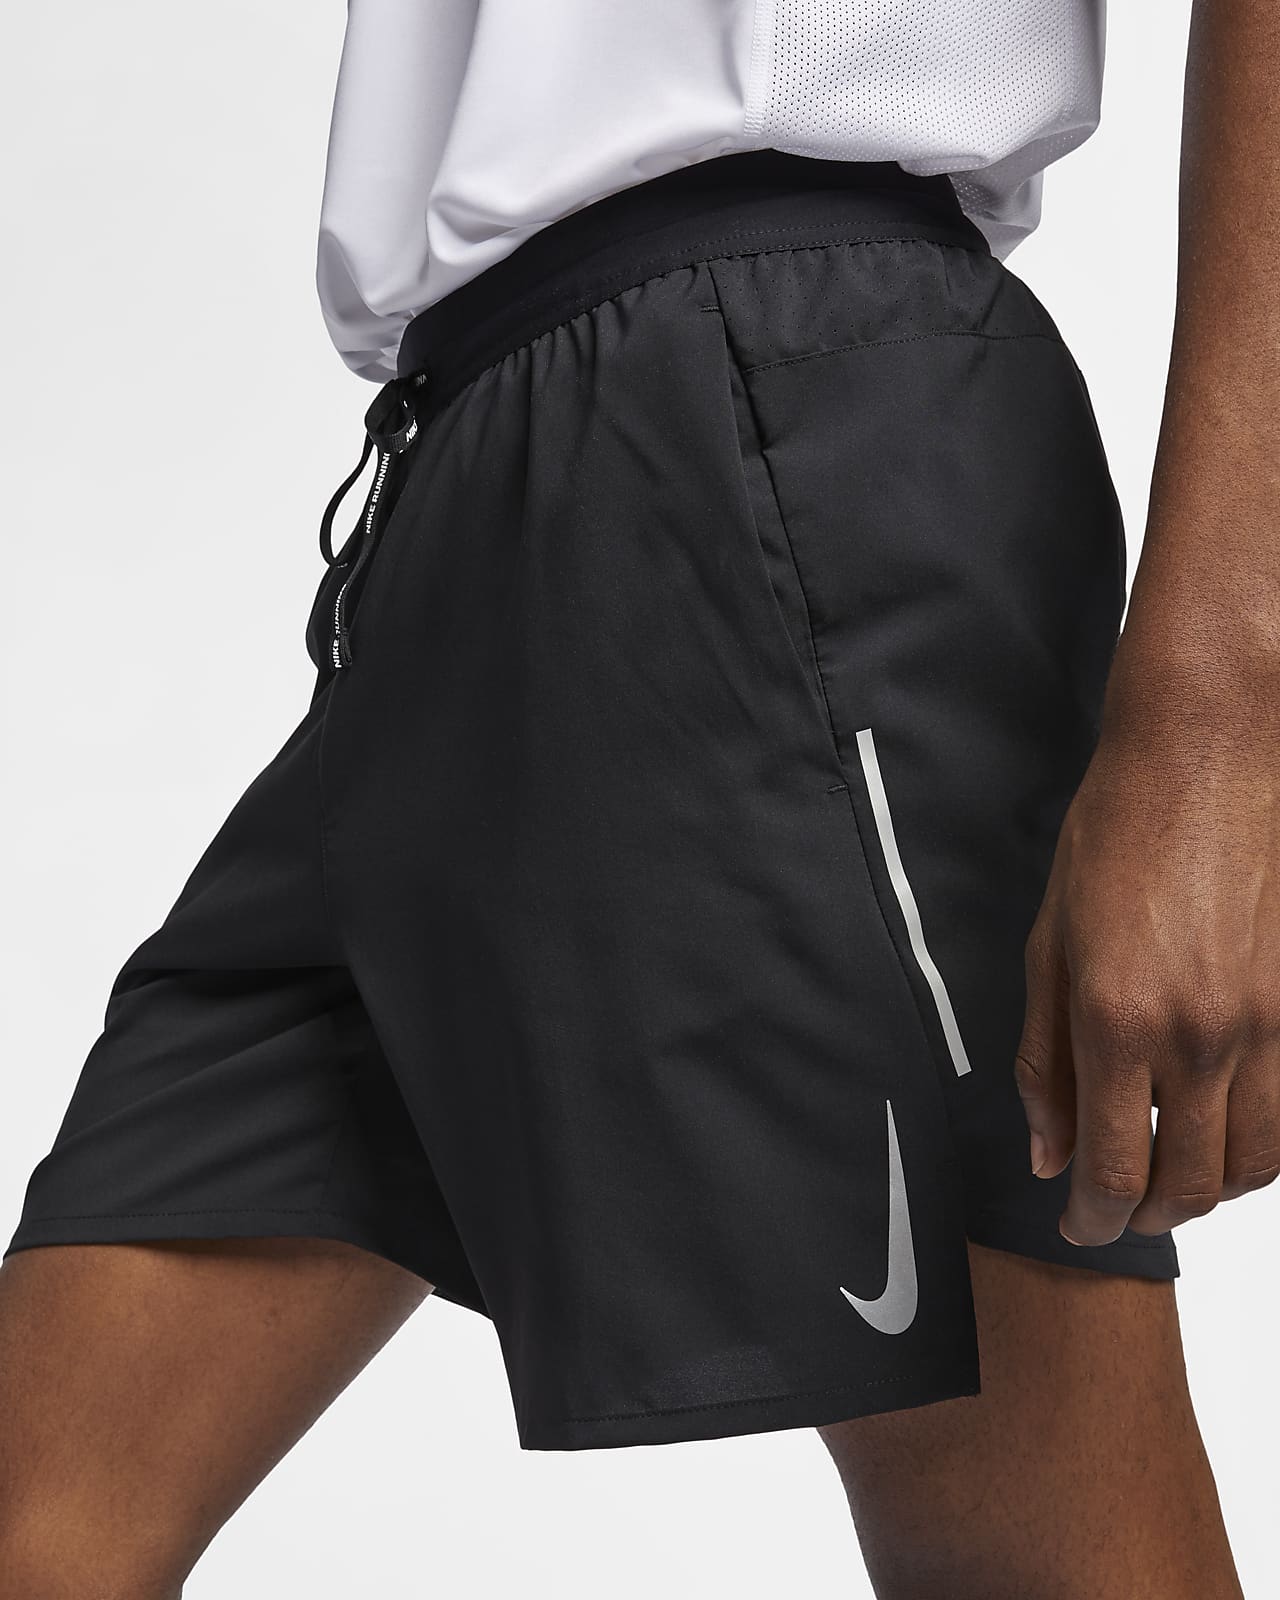 Brief-Lined Running Shorts. Nike MA